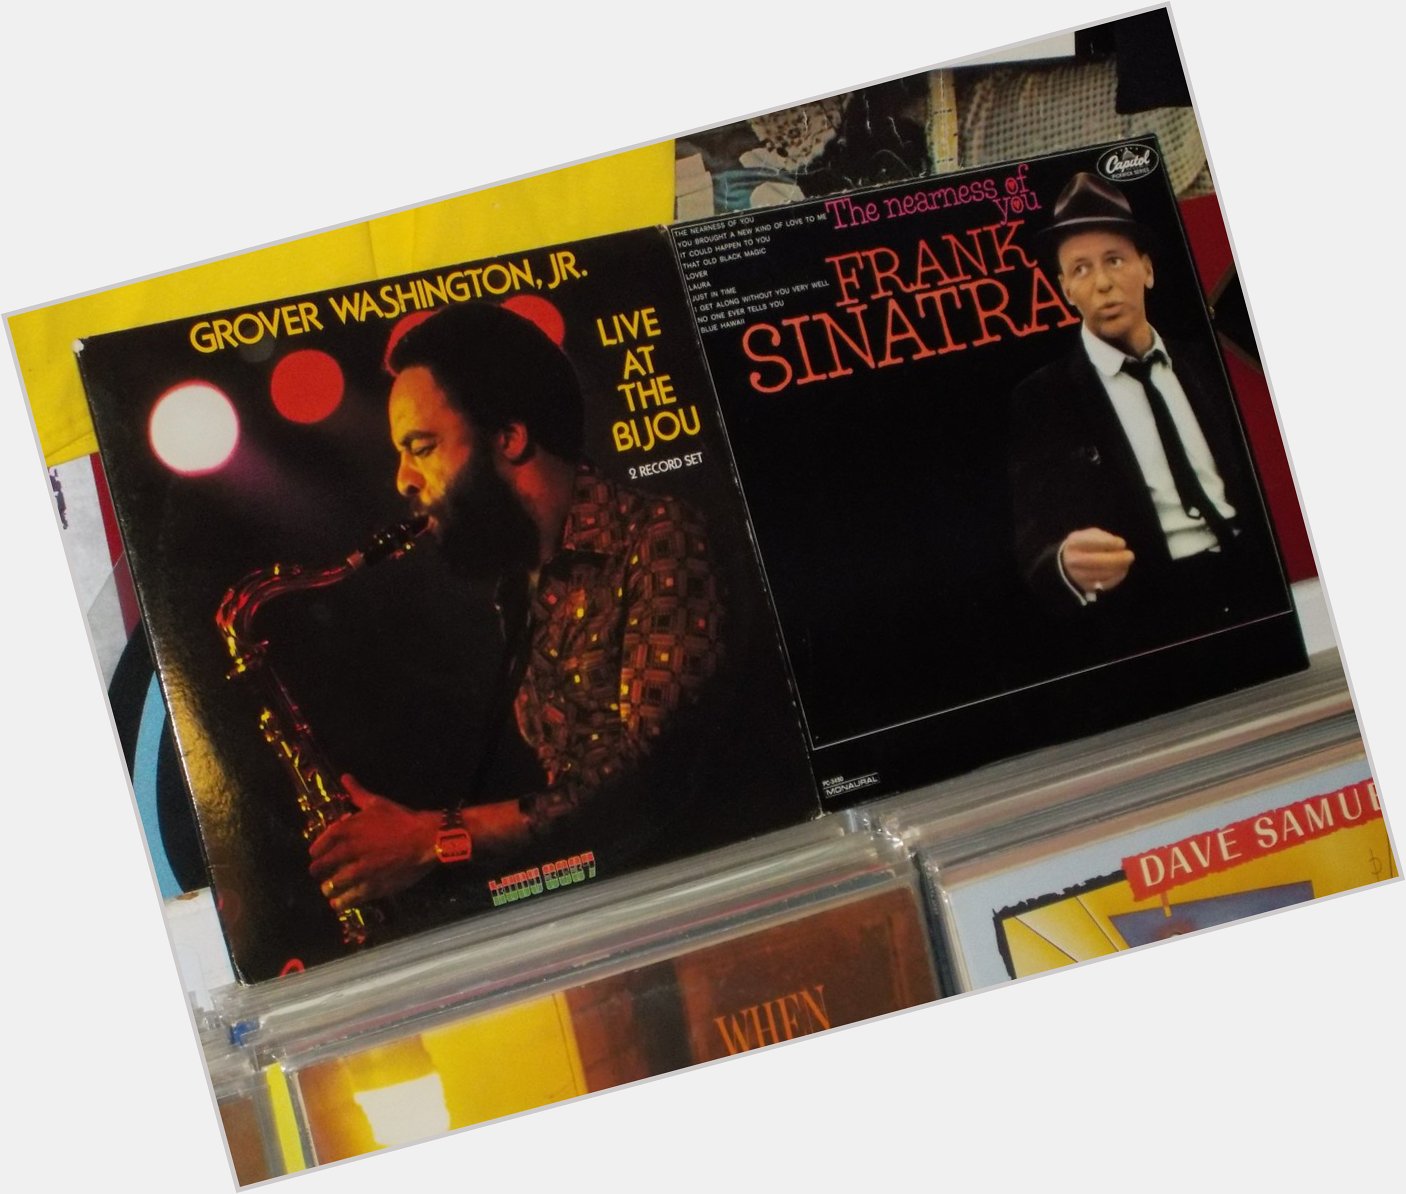 Happy Birthday to the late Grover Washington Jr. and the late Frank Sinatra 